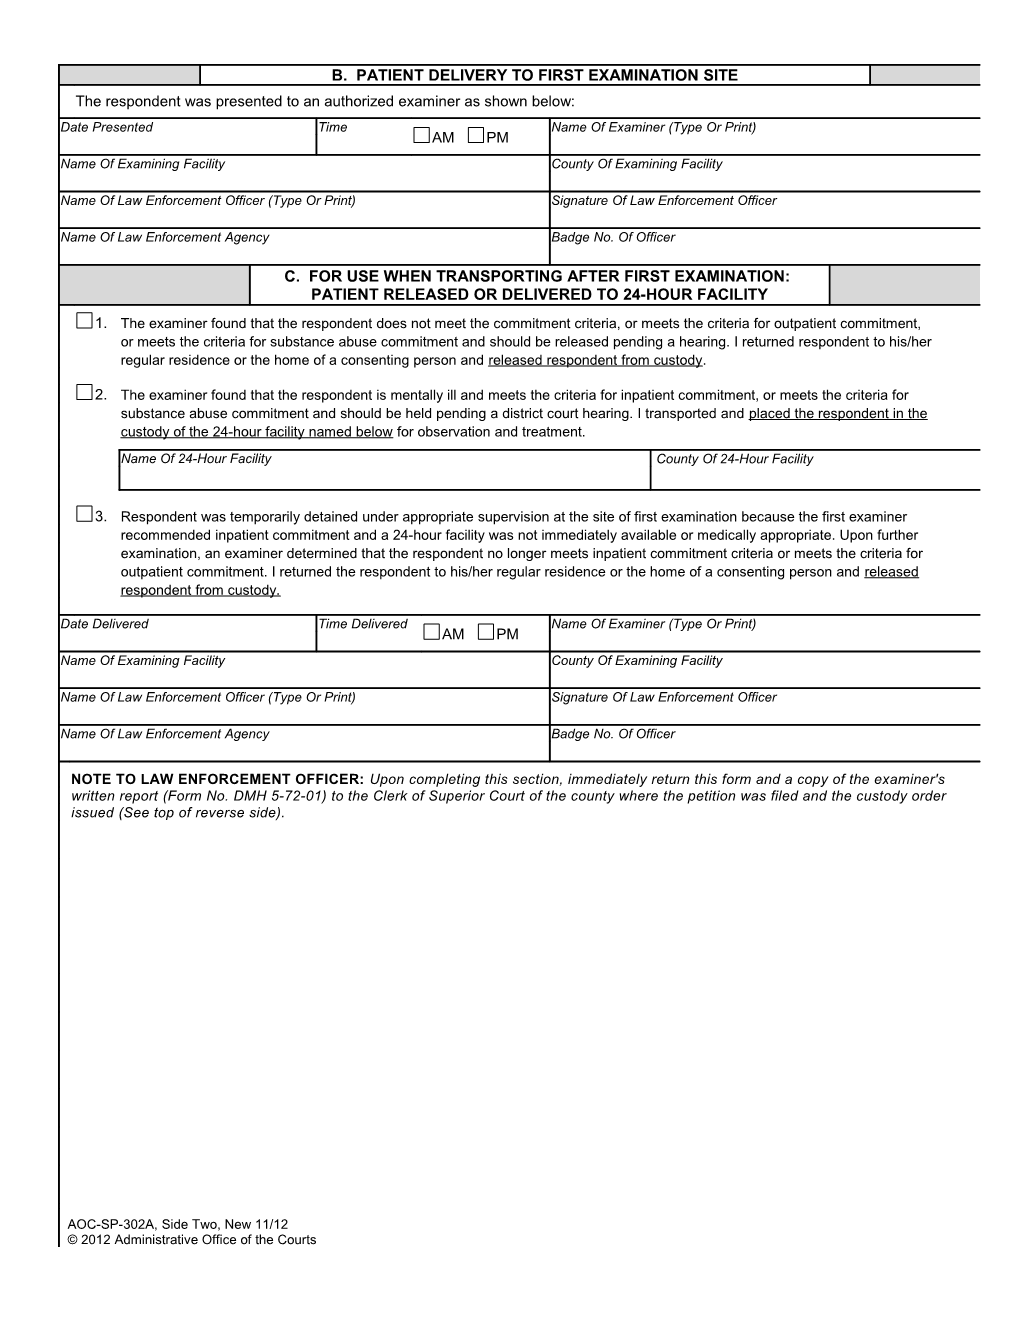 Findings and Custody Order - Involuntary Commitment